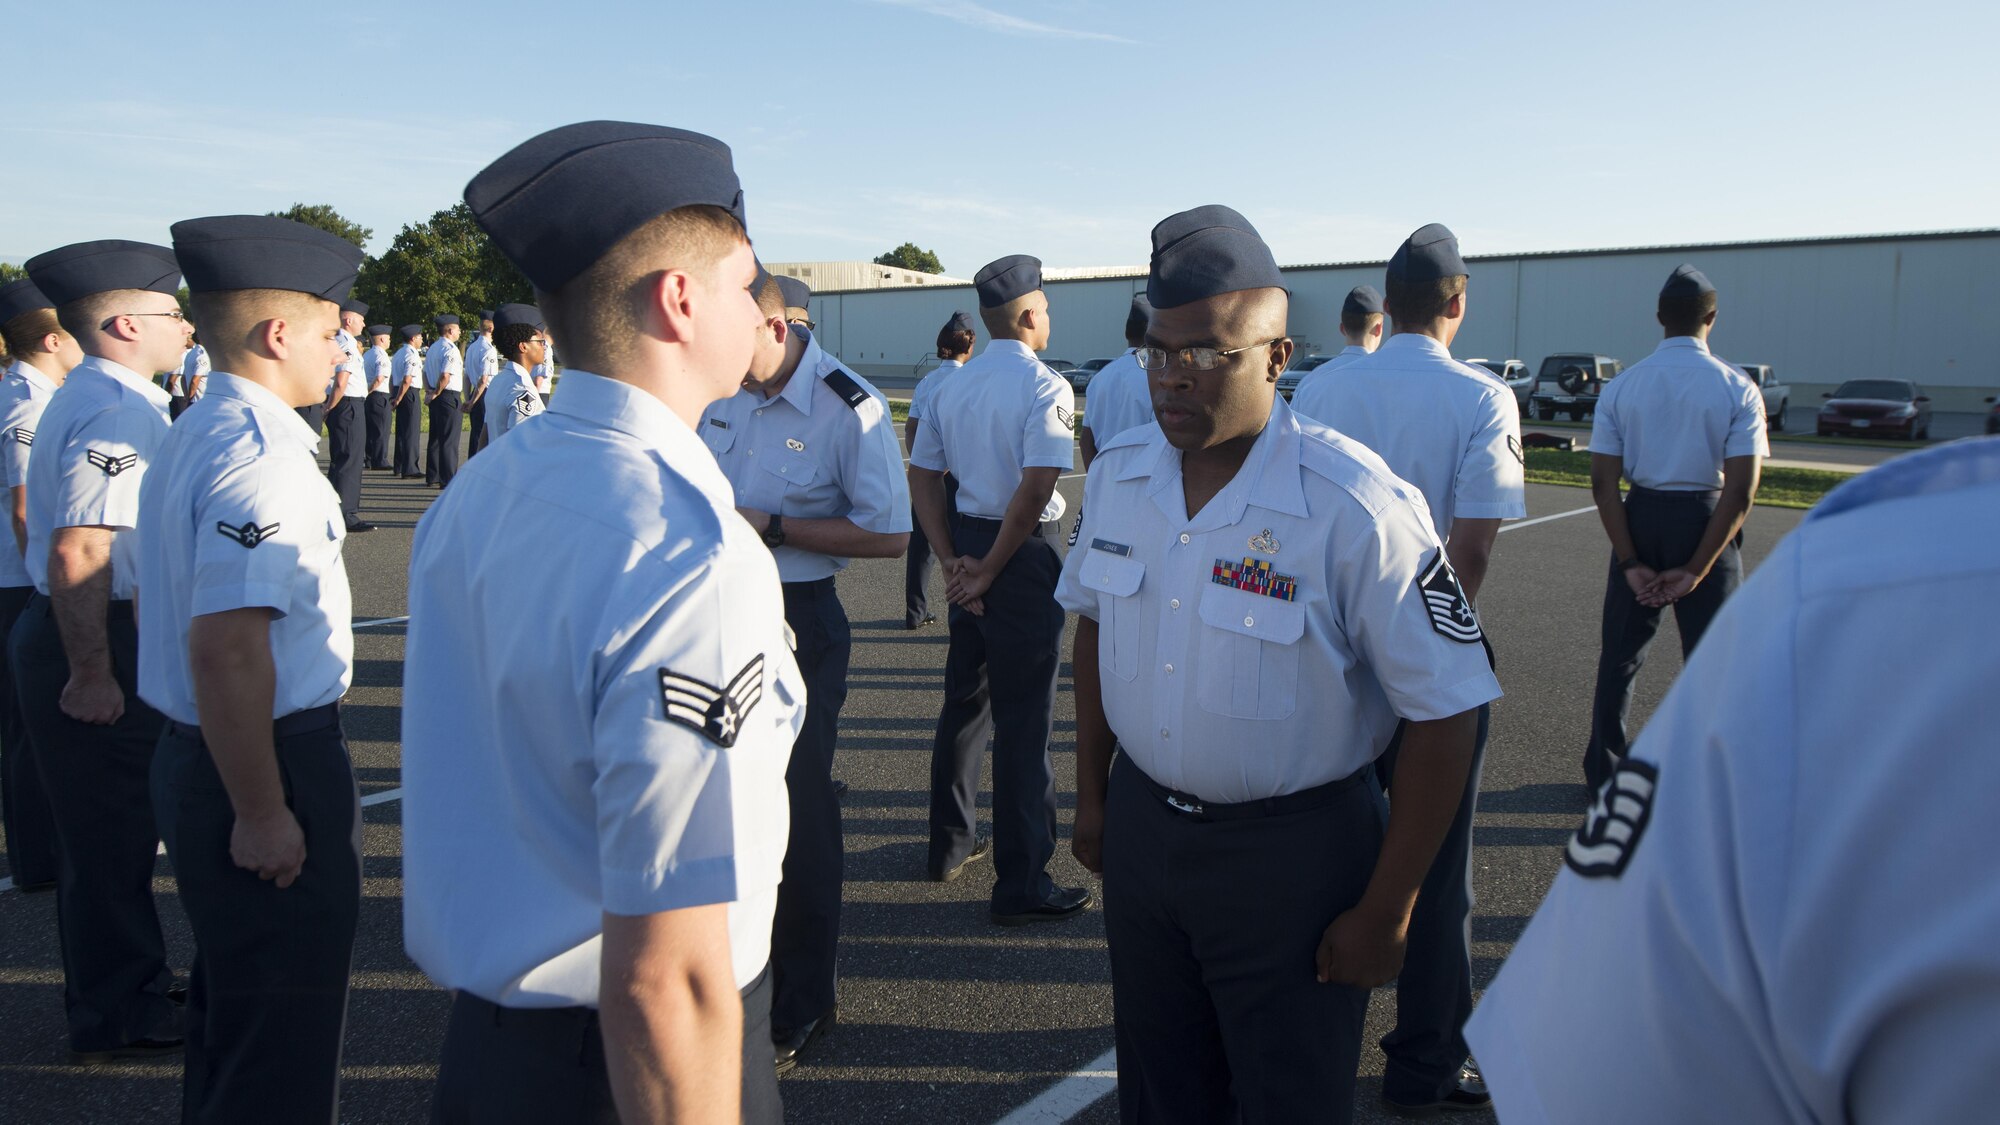 Master Sgt. Montrell Jones, 436th Logistics Readiness first sergeant, looks over an Airman’s uniform during an open-ranks inspection Aug. 17, 2016, on Dover Air Force Base, Del. An open-ranks inspection is used to ensure that Air Force Instruction 36-2903 is being adhered to. (U.S. Air Force photo/Senior Airman Zachary Cacicia)